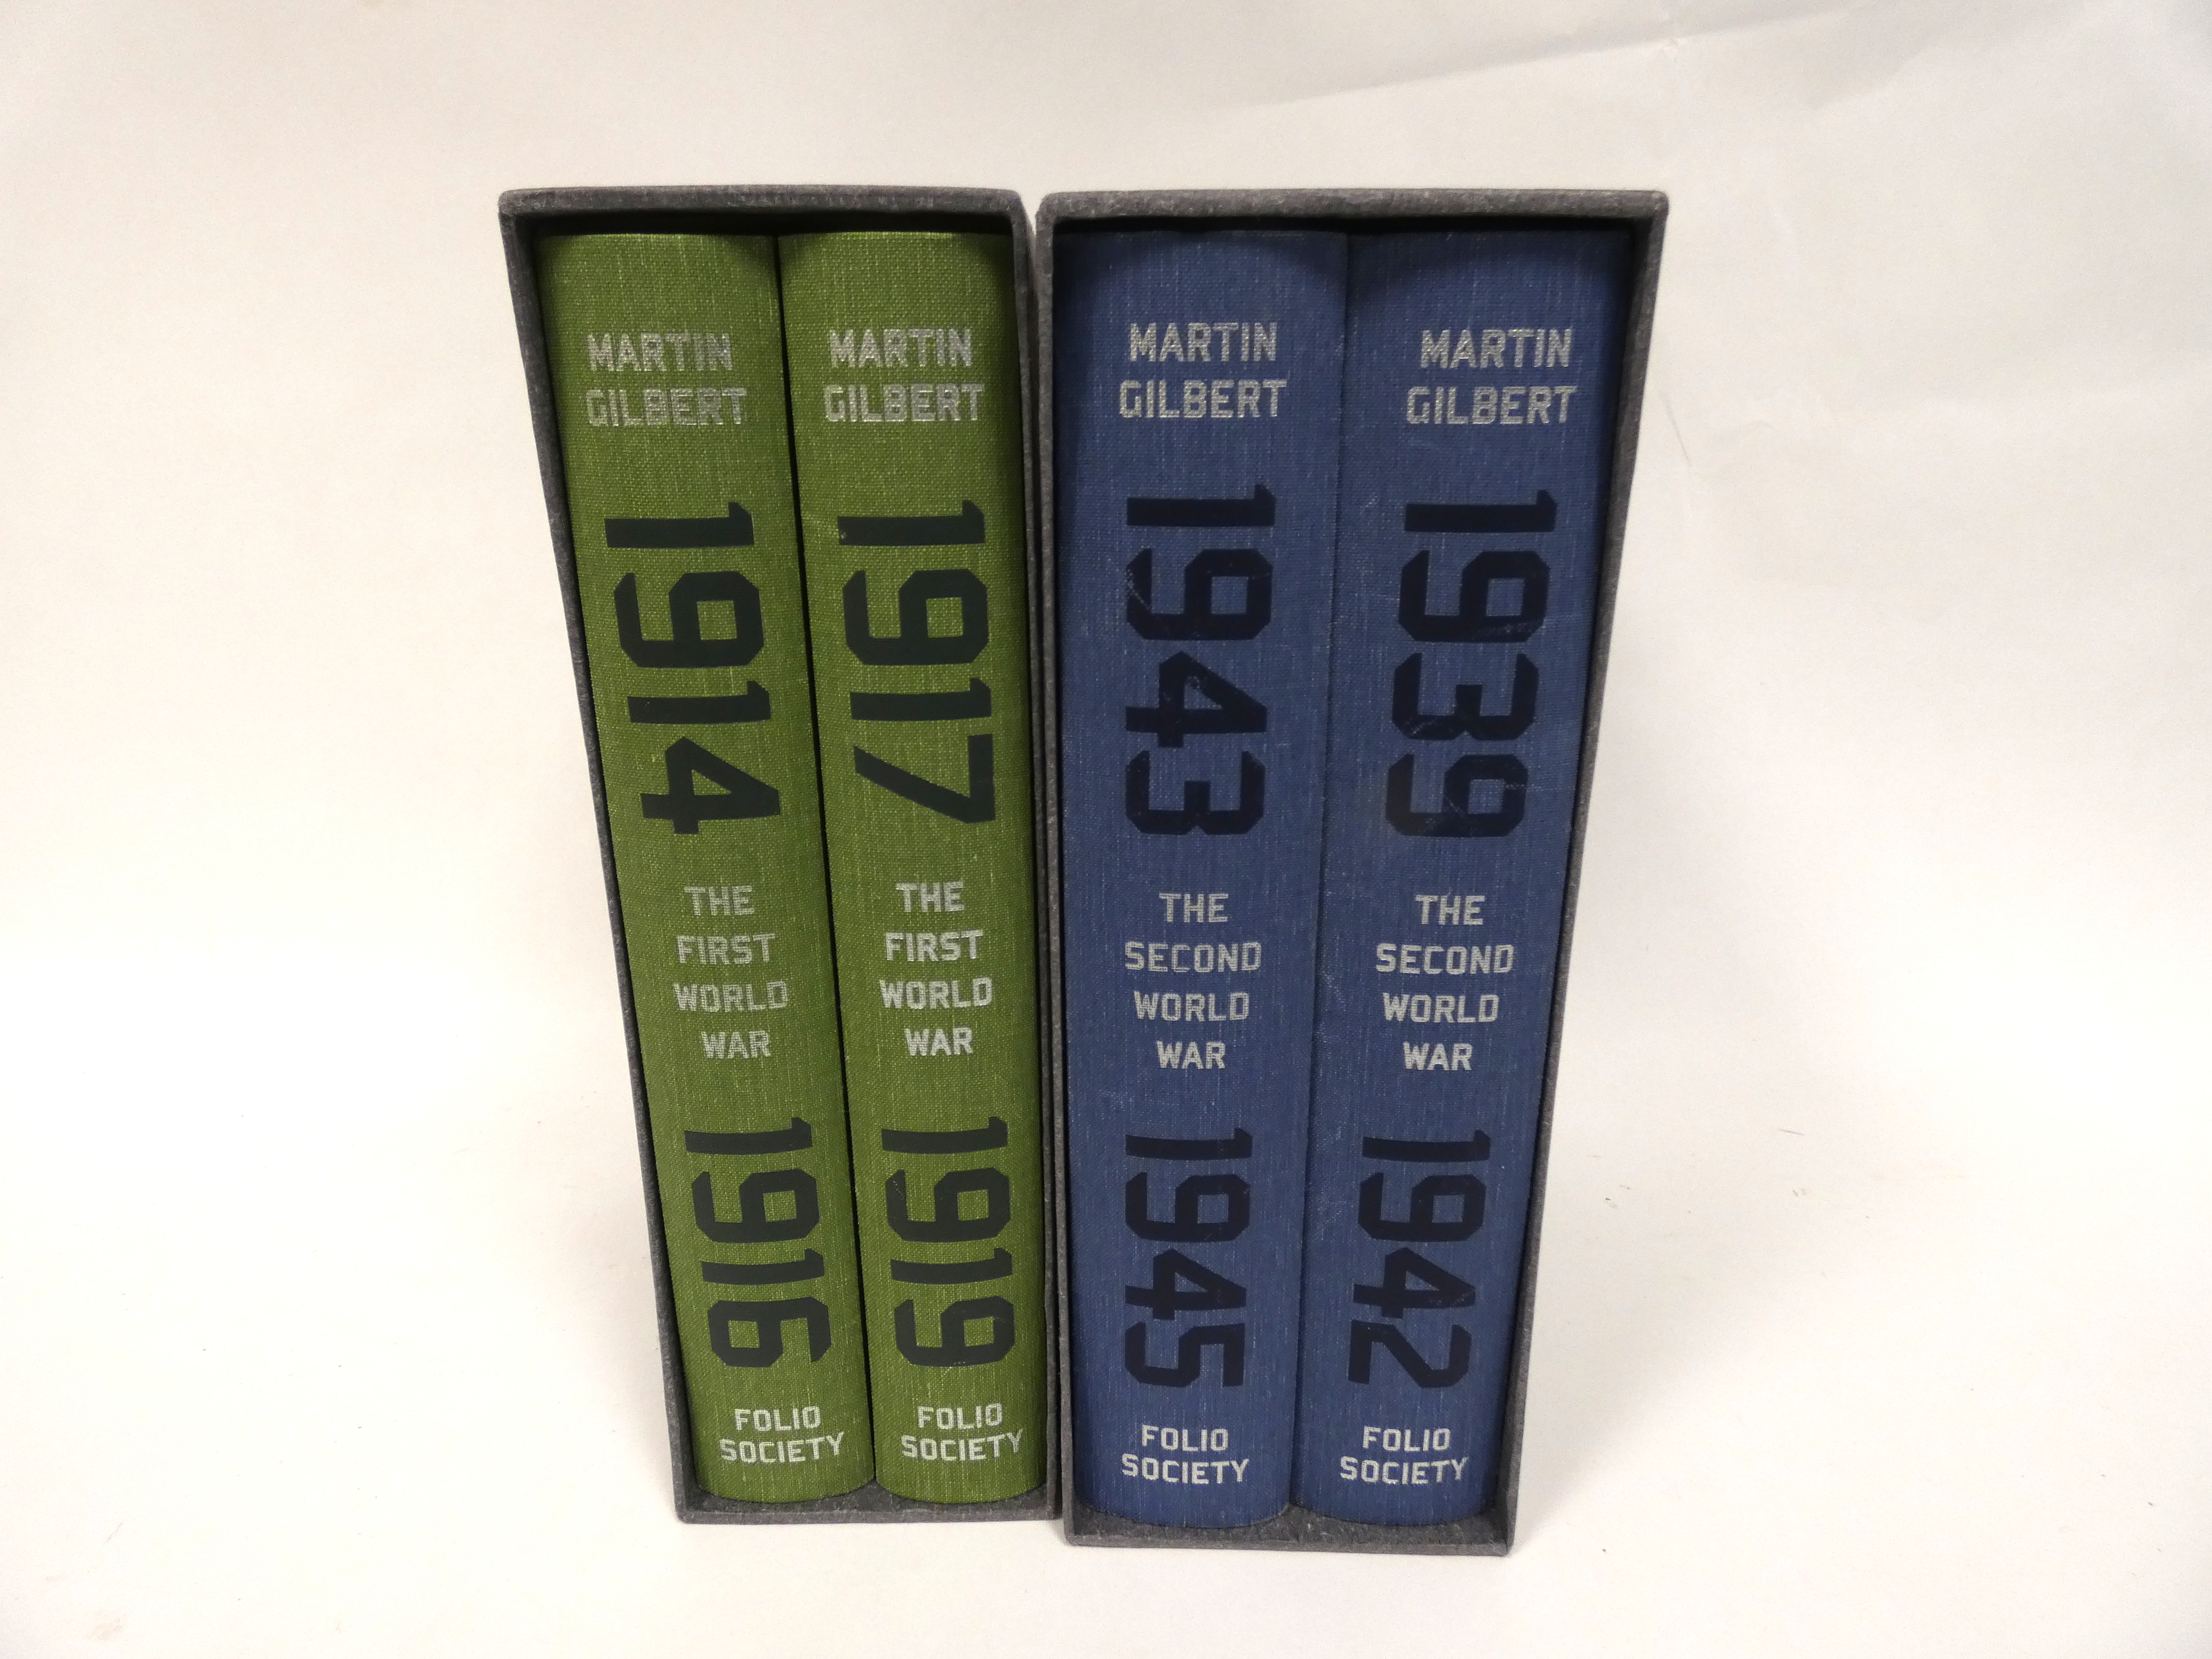 Folio Society.  Martin Gilbert. 4 vols. re. WWI & WWII in two slip cases.